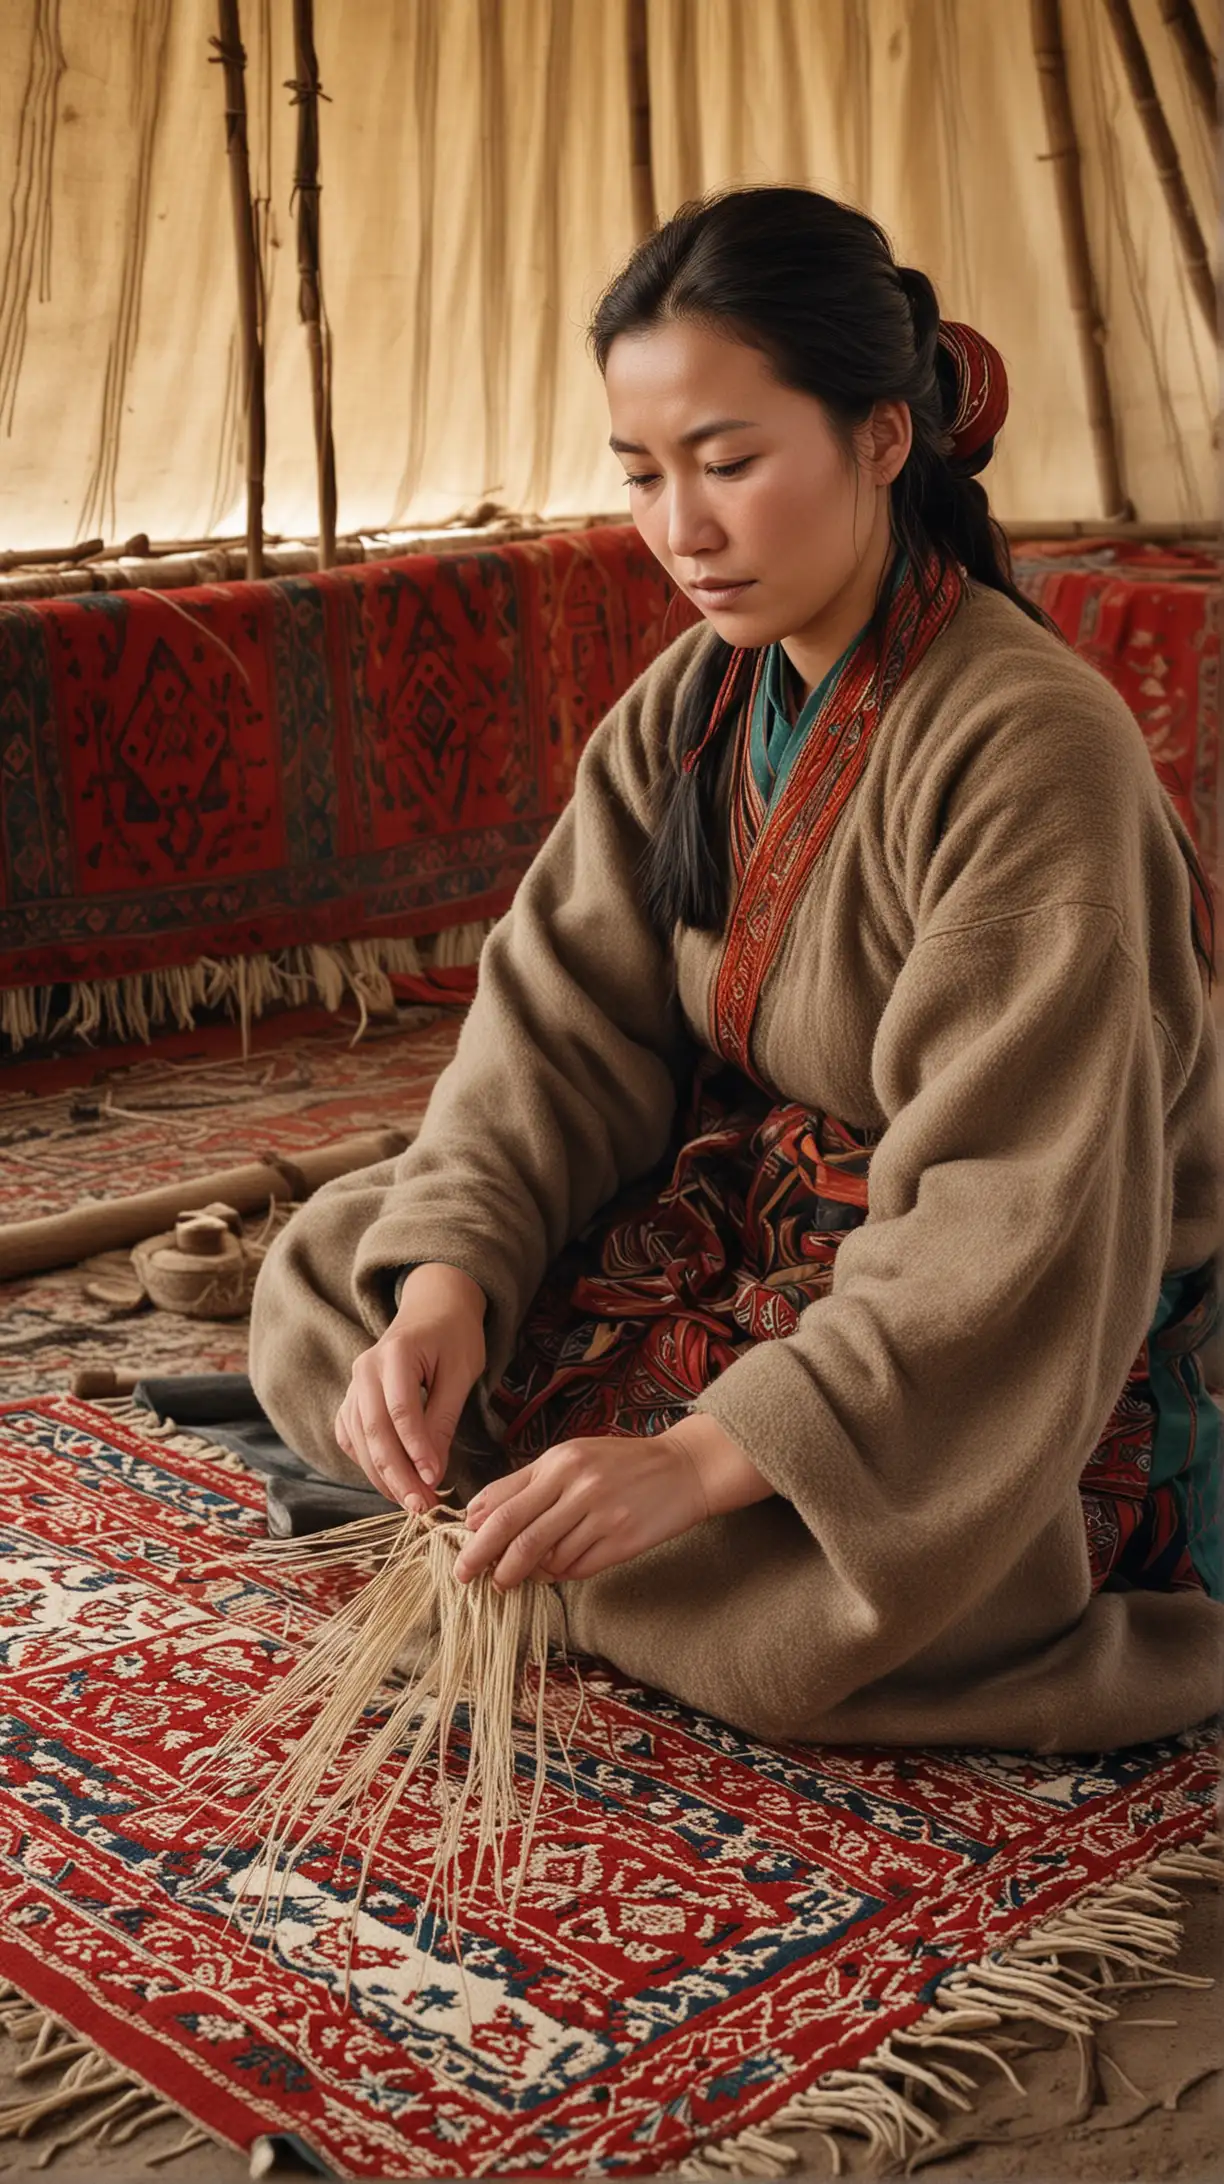 Generate an image capturing the industrious spirit of a Mongol woman as she goes about her daily tasks on the steppe. She is shown weaving intricate patterns into a traditional felt carpet, sitting beside a portable loom set up outside her family's yurt. Despite the nomadic lifestyle, her hands move with practiced precision, skillfully manipulating the wool fibers into beautiful designs that reflect the rich cultural heritage of her people. hyper realistic